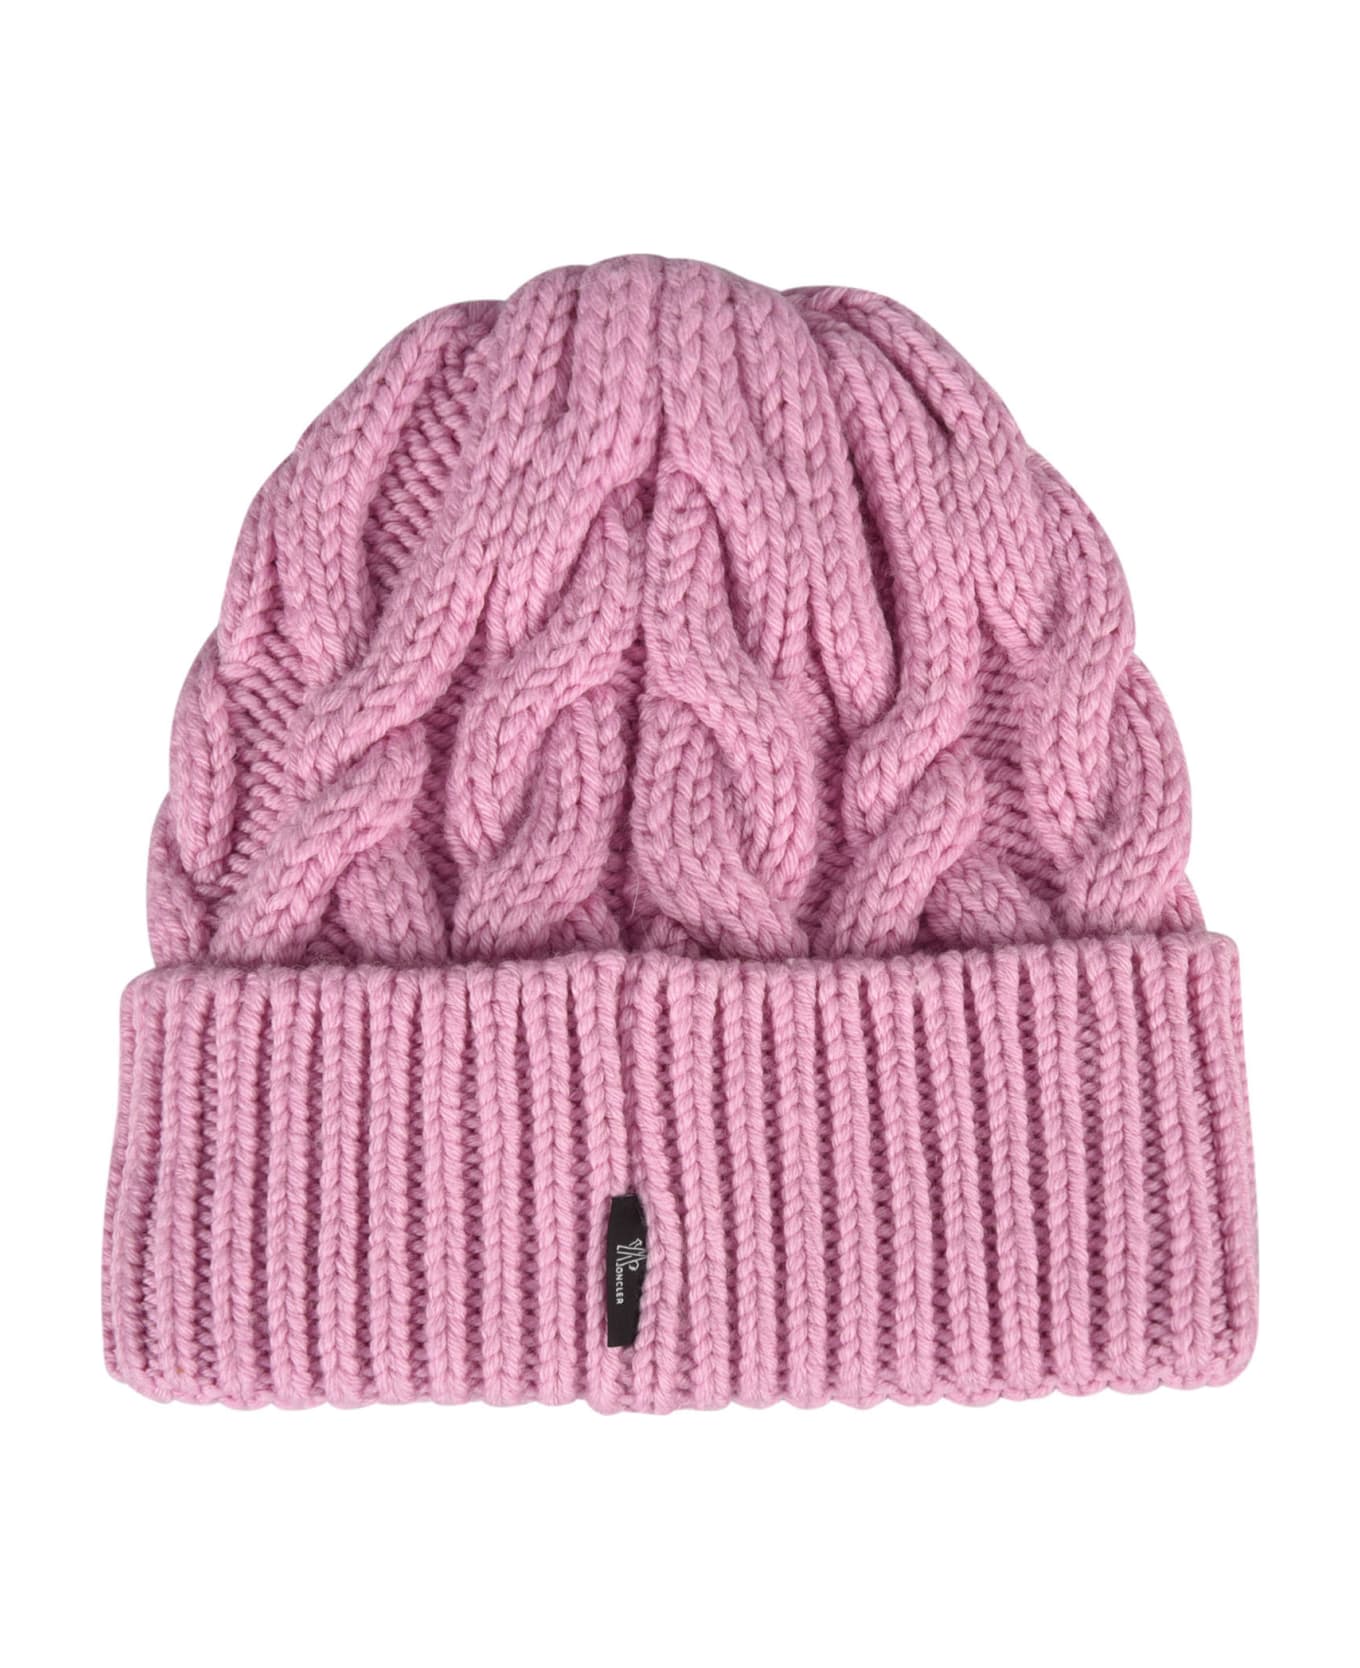 Moncler Grenoble Logo Patch Ribbed Beanie - Dark Pink